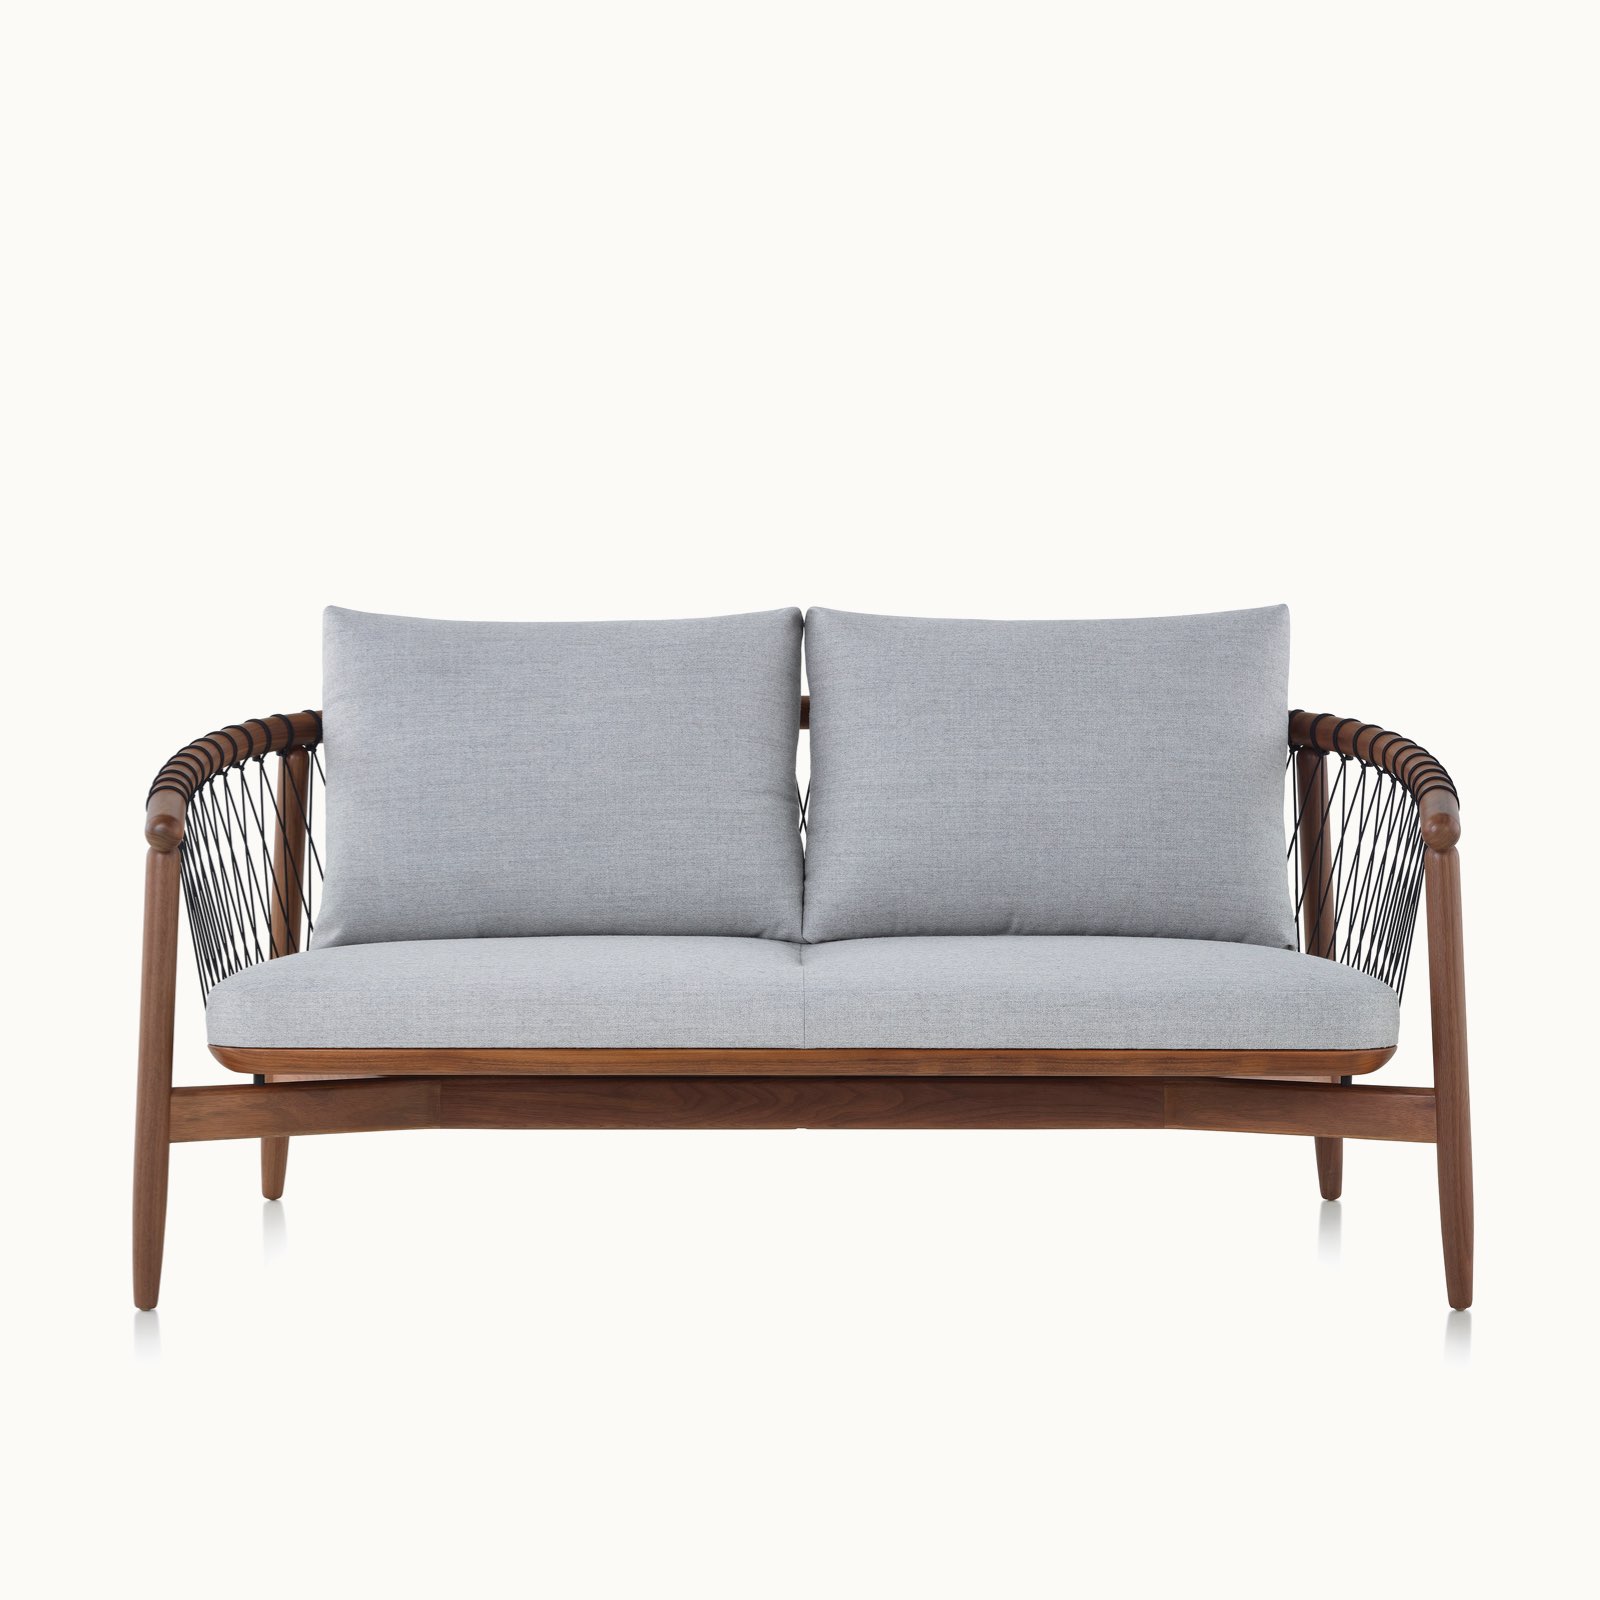 A Crosshatch Settee with a walnut frame, black cords, and light neutral fabric, viewed from the front.